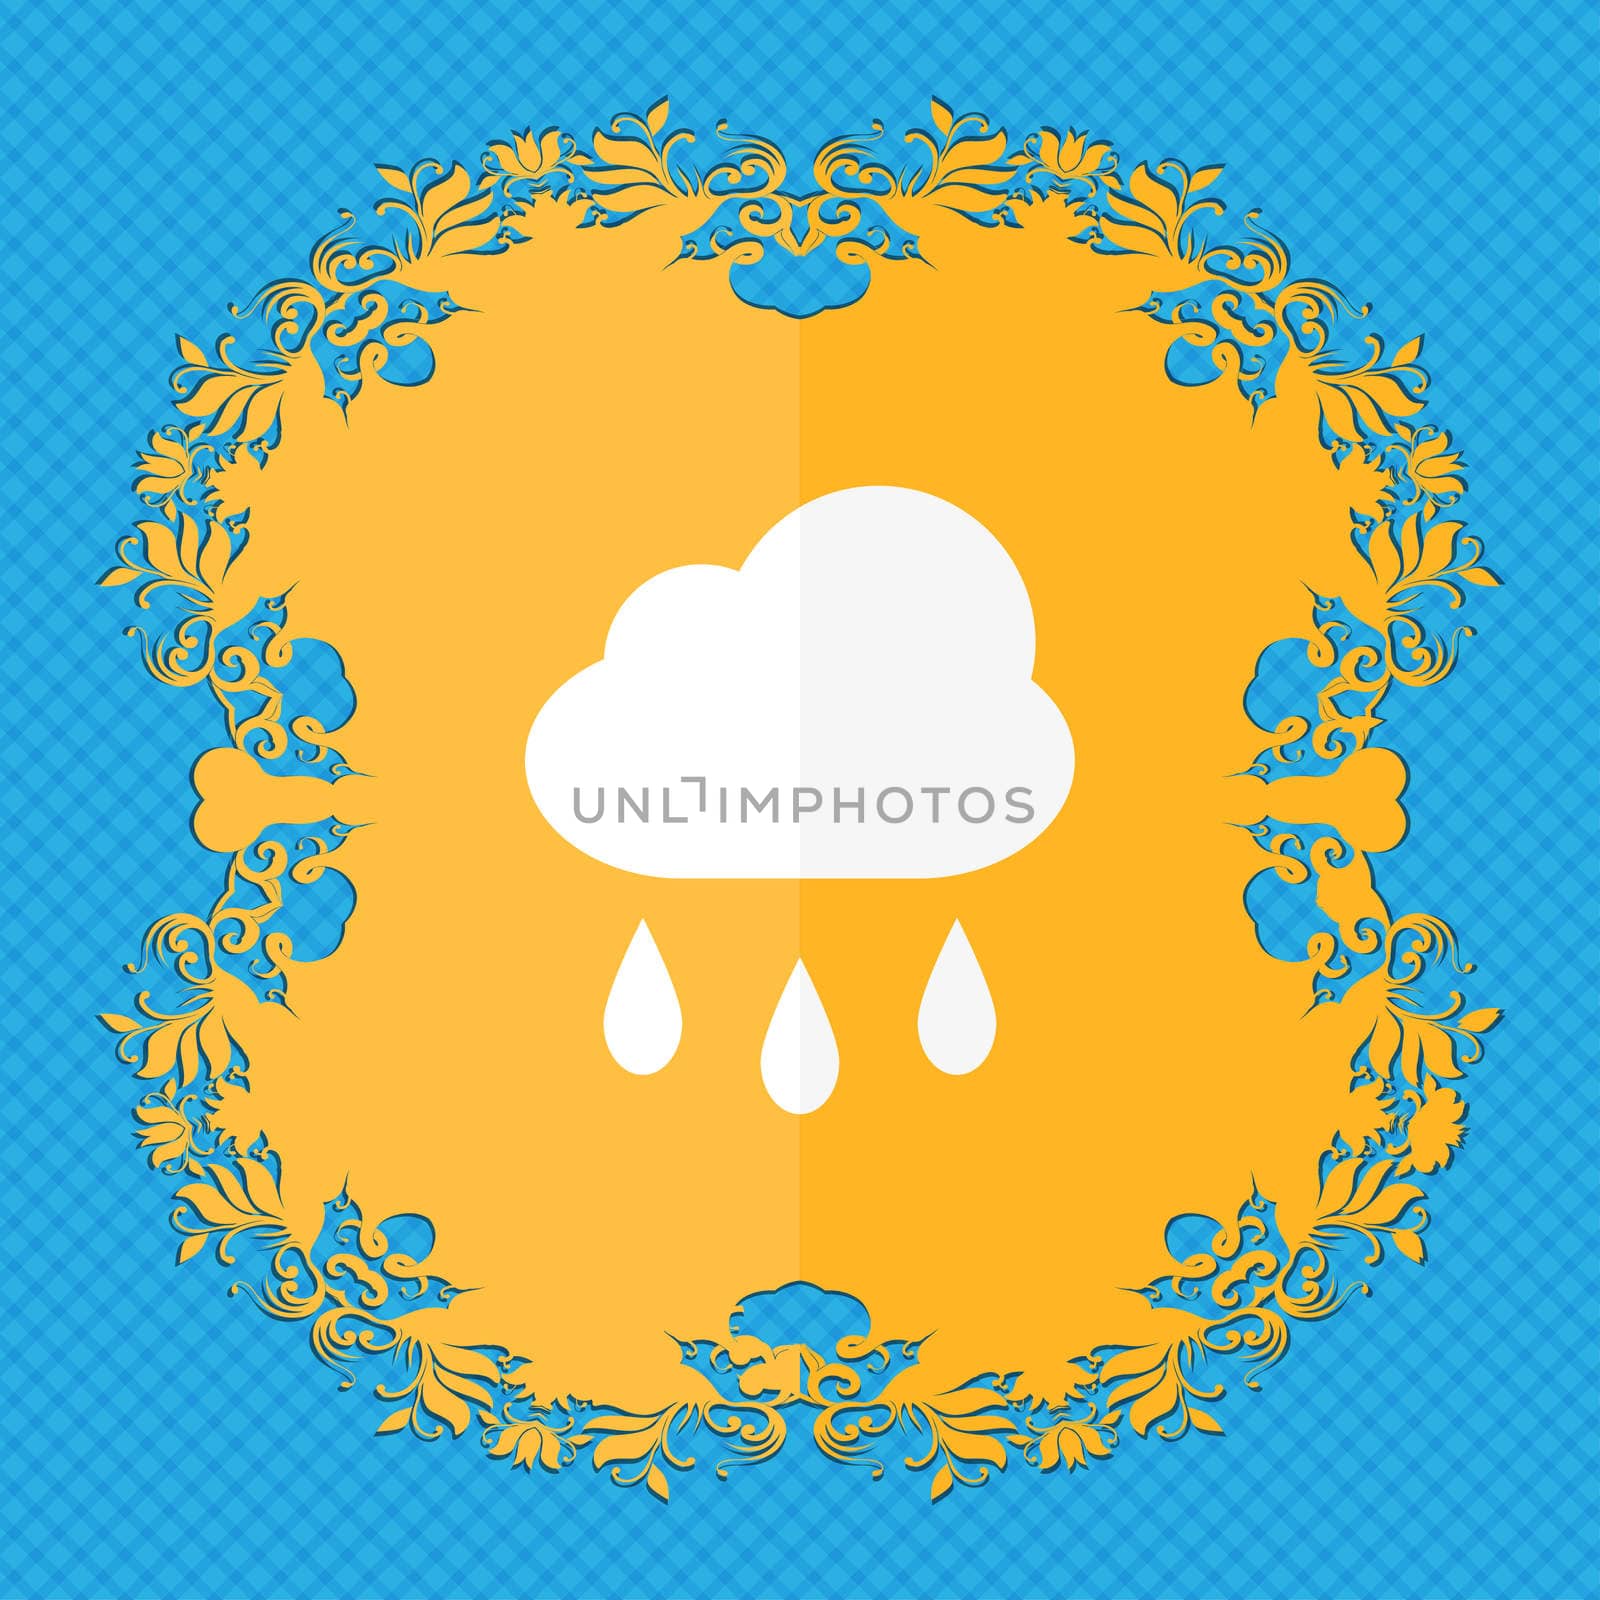 Weather Rain . Floral flat design on a blue abstract background with place for your text. illustration